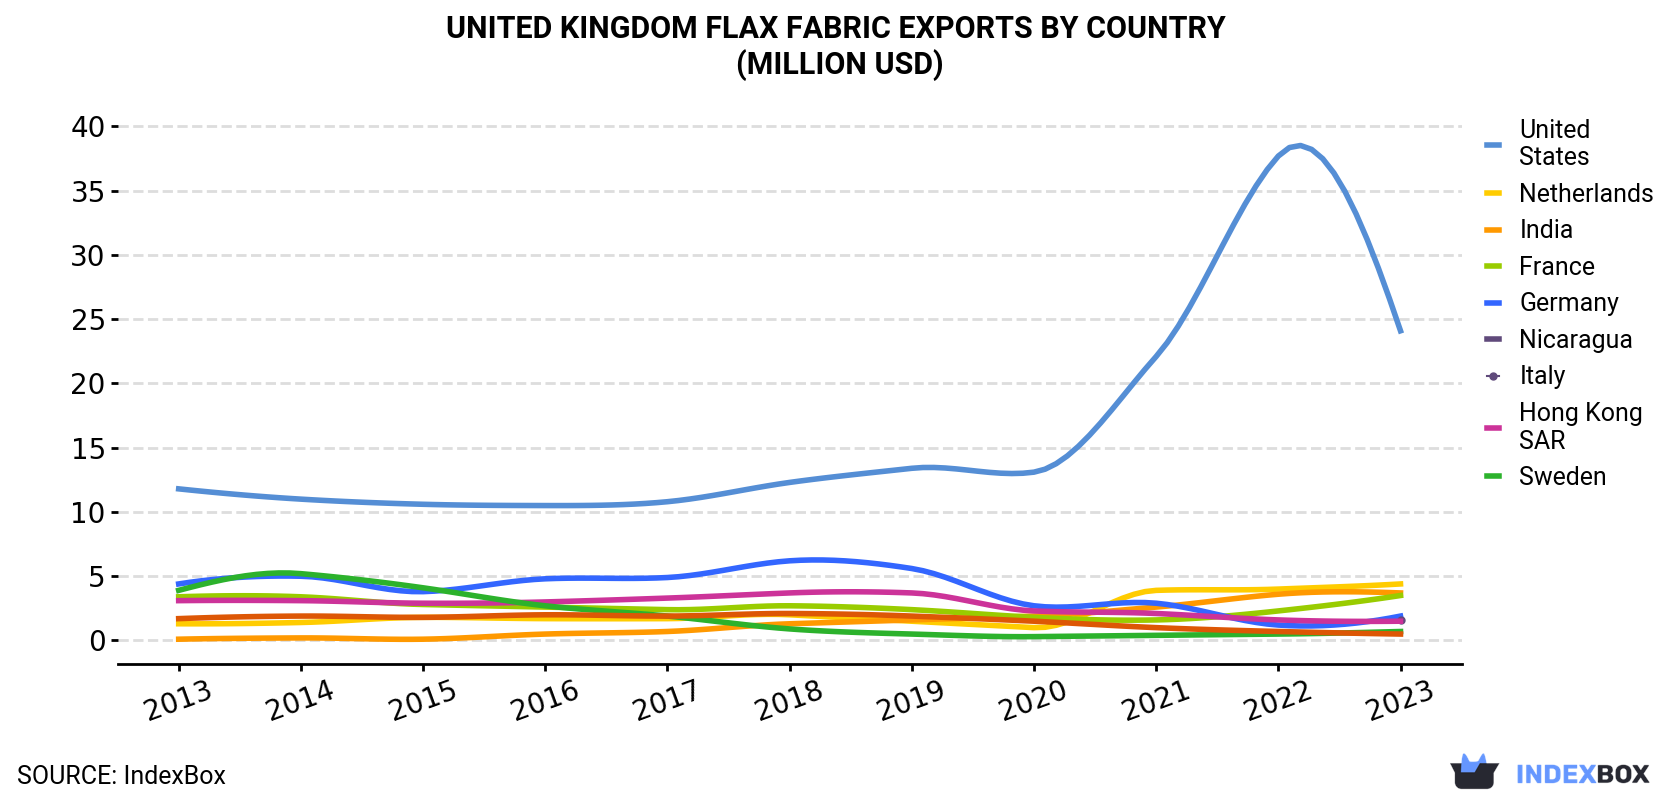 United Kingdom Flax Fabric Exports By Country (Million USD)